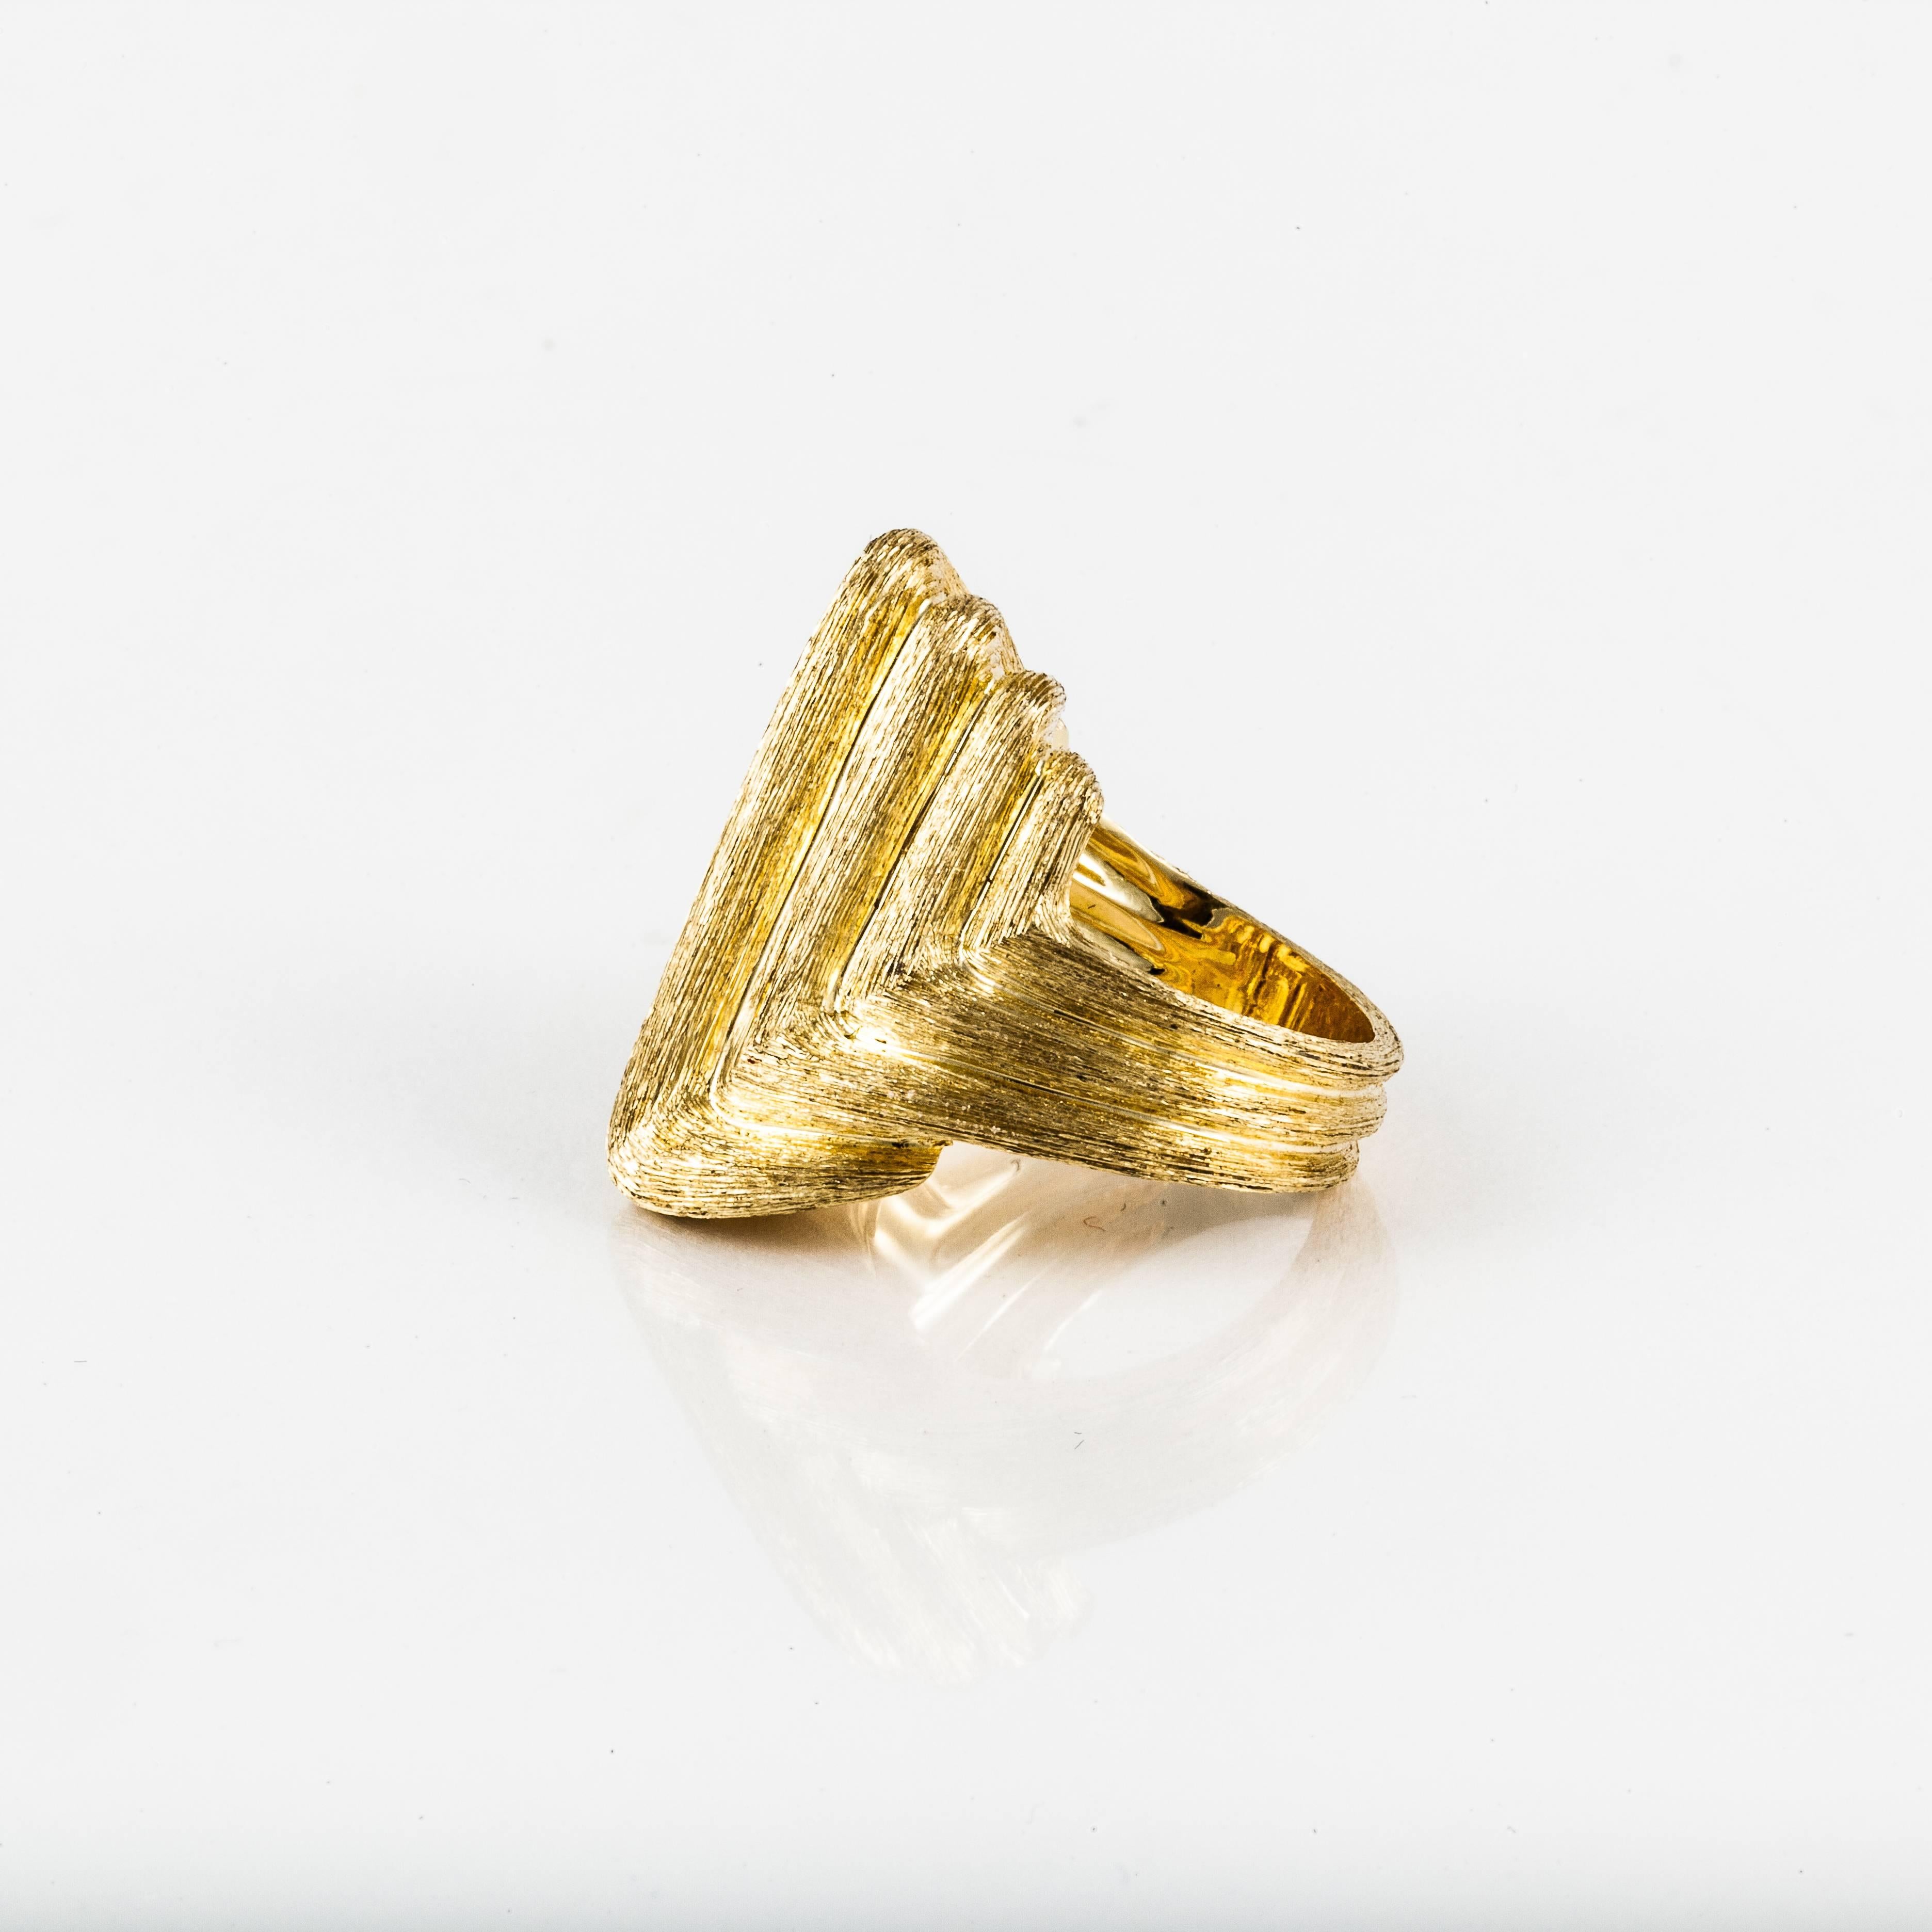 Henry Dunay ring in 18K yellow gold with the Sabi finish known to Dunay.  Marked on the inside 